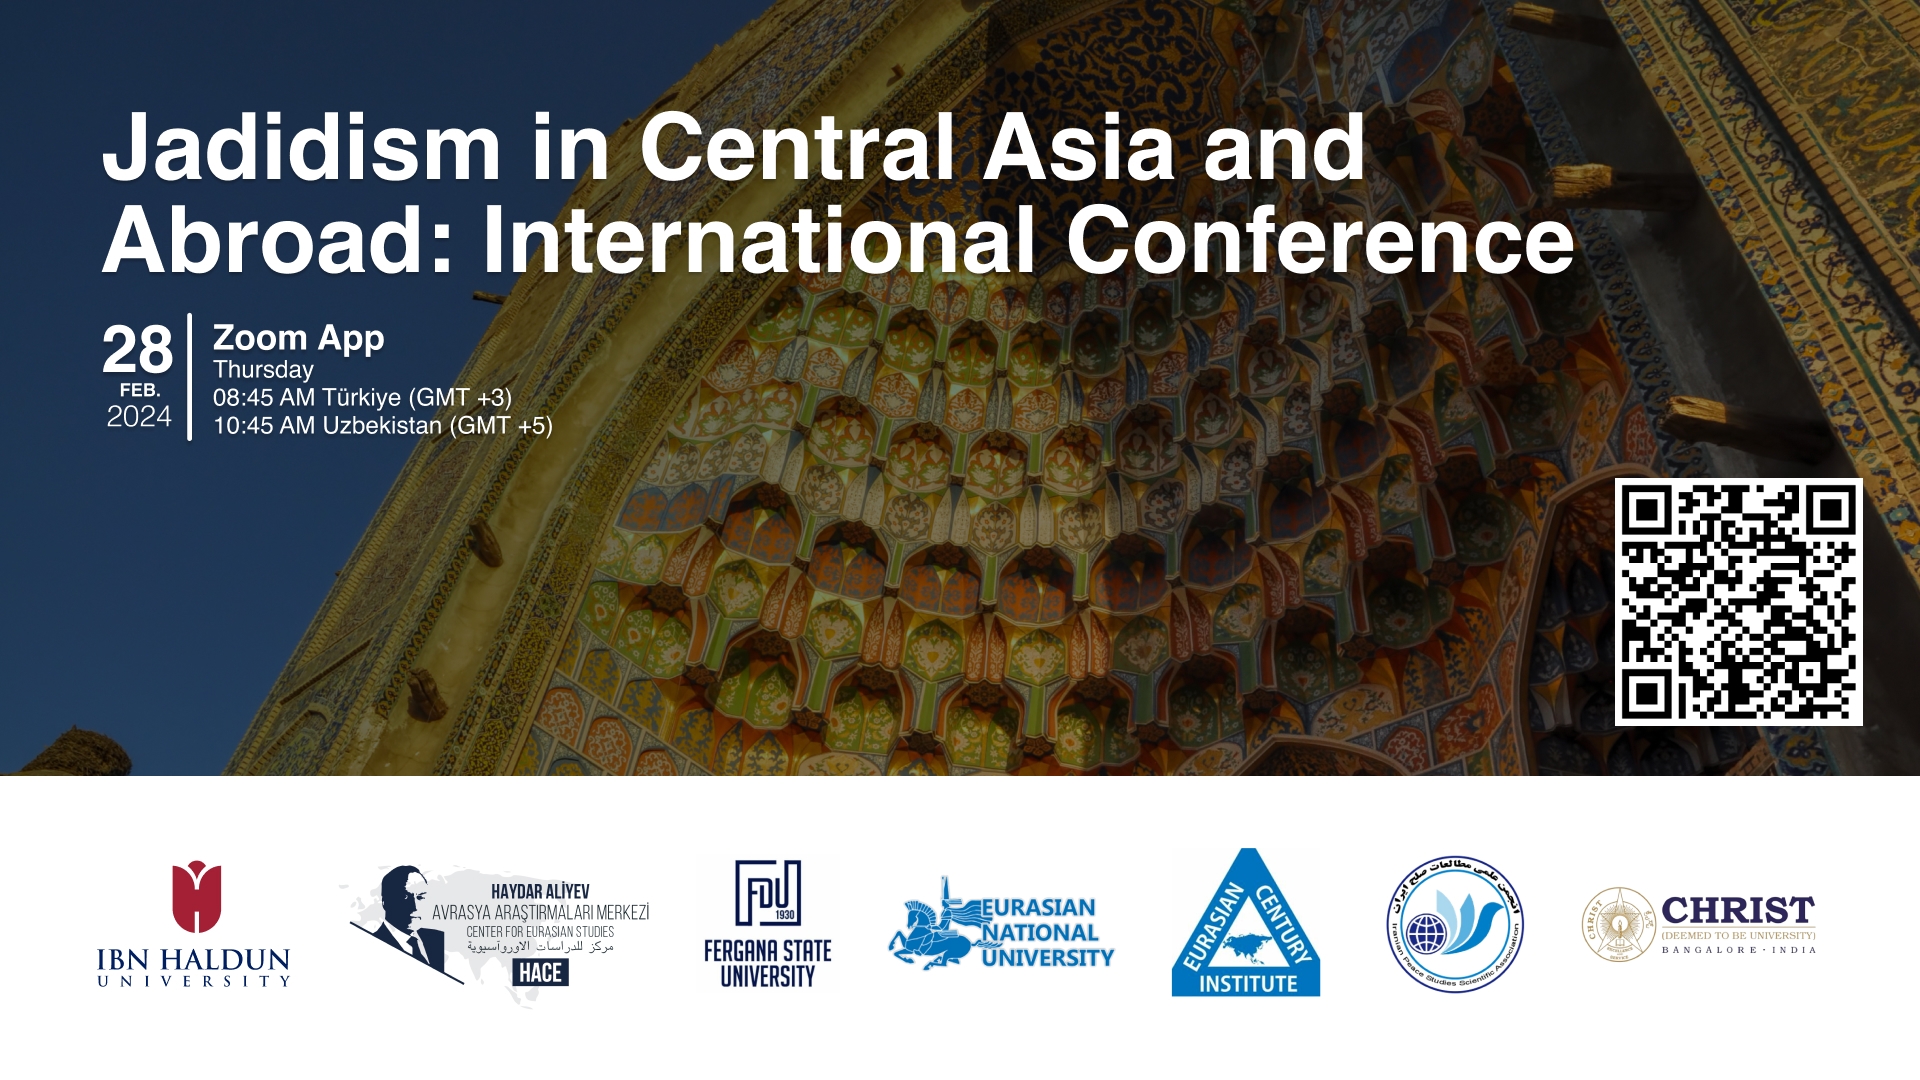 Jadidism in Central Asia and Beyond: International Conference